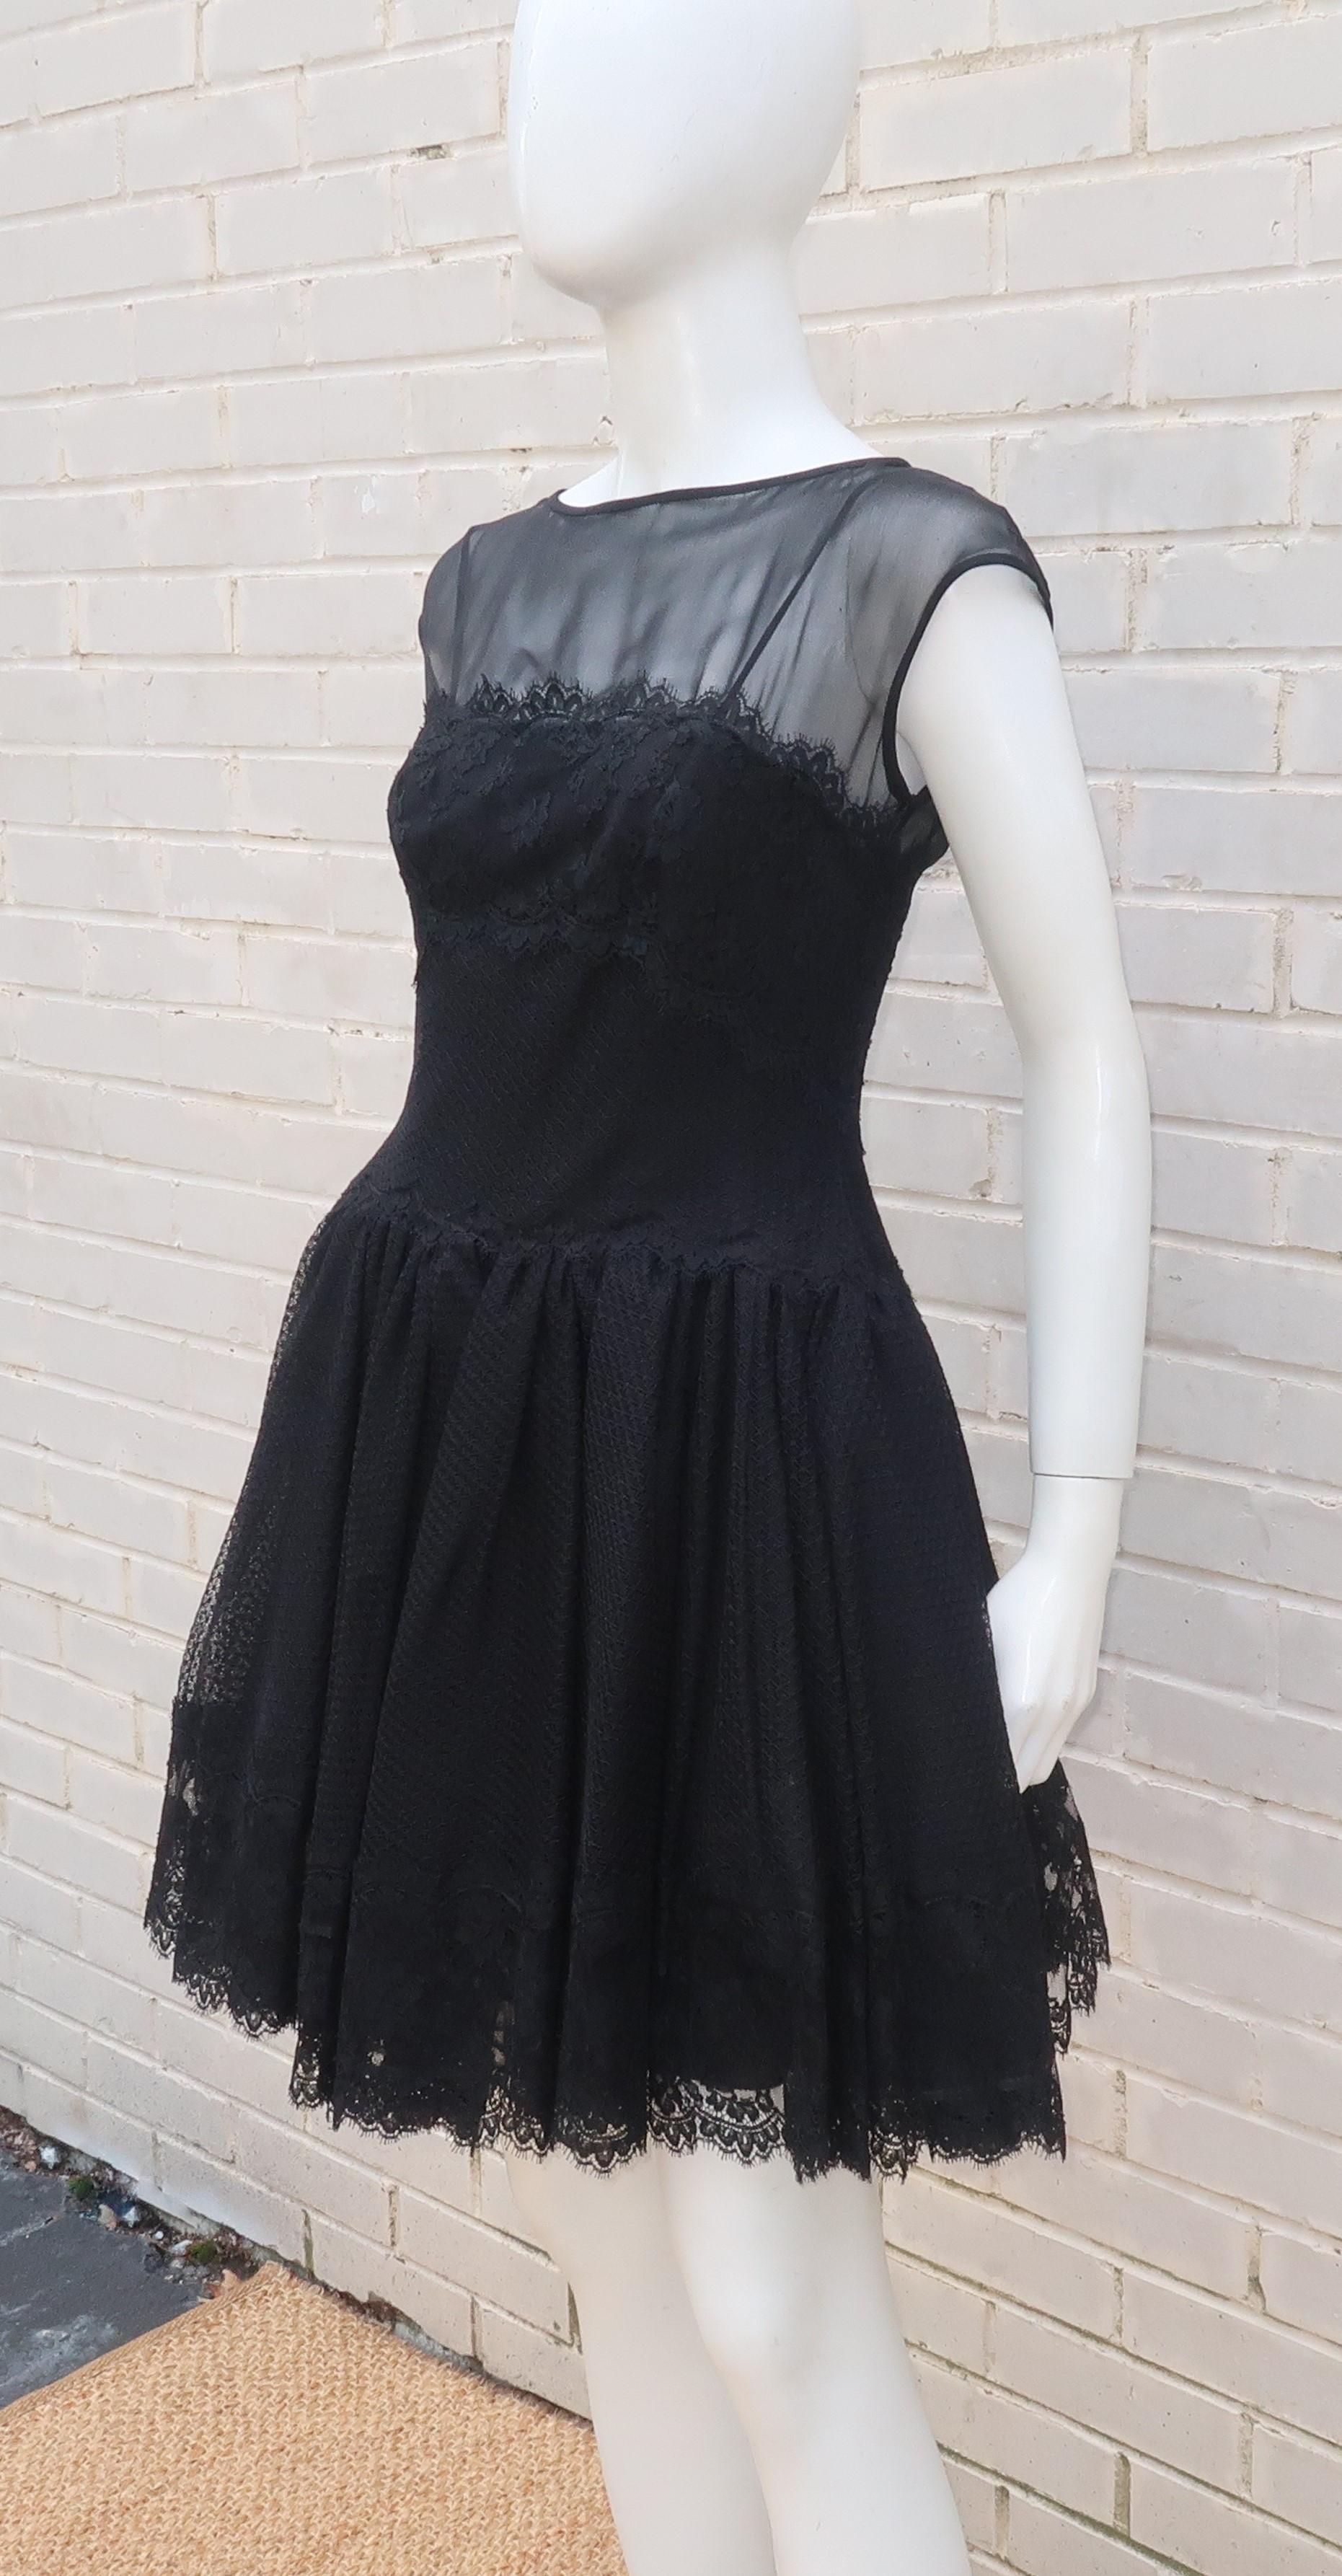 Stanley Platos Black Tulle and Lace Ballerina Cocktail Dress, 1980s   4